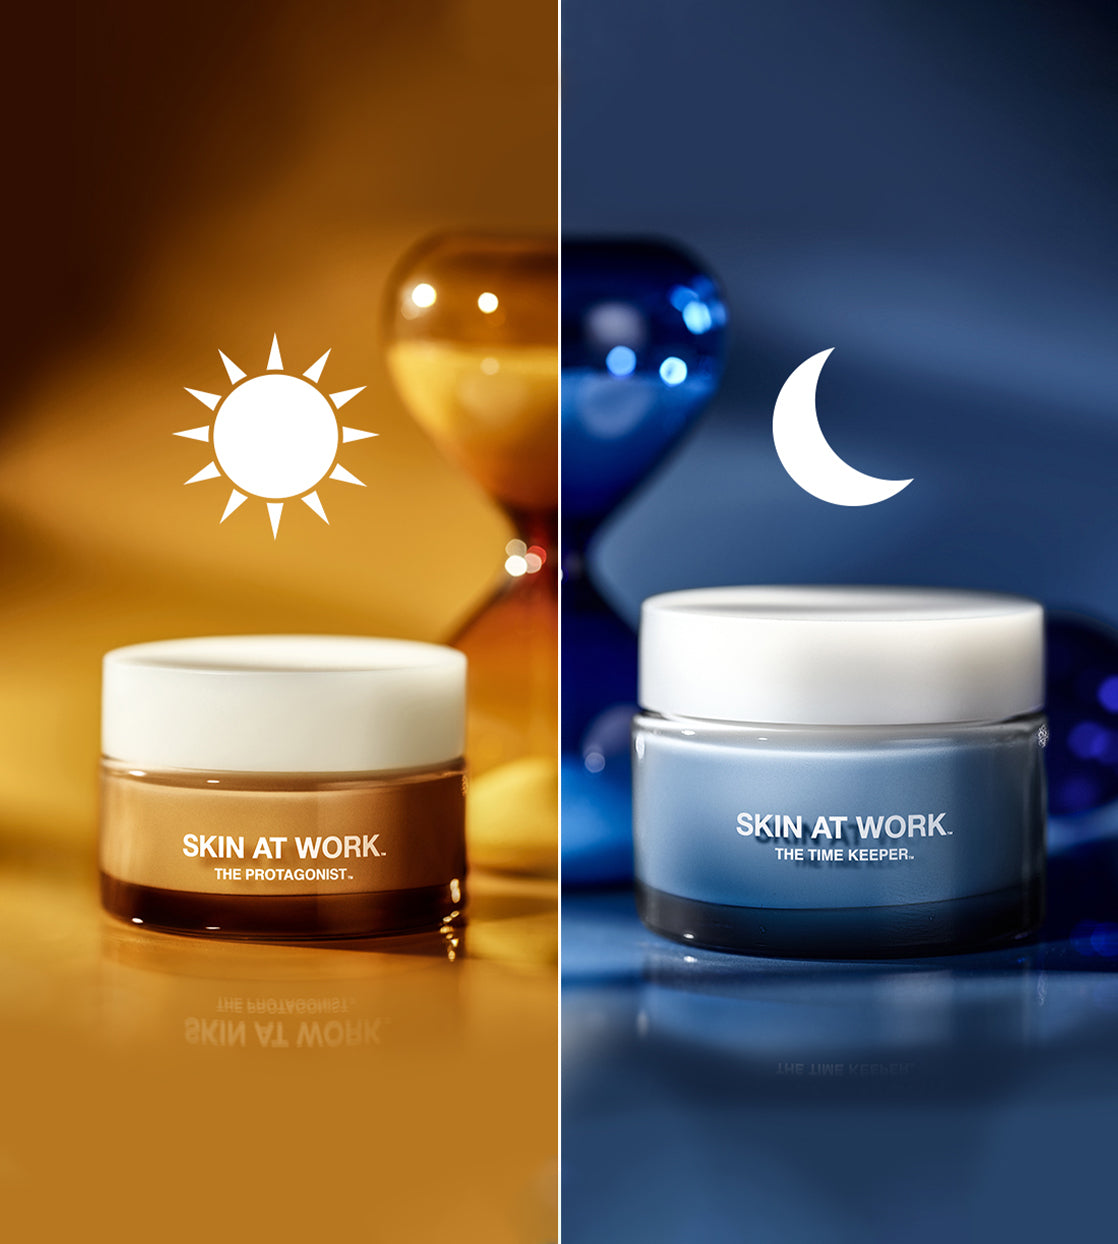 THE DAY & NIGHT DUO